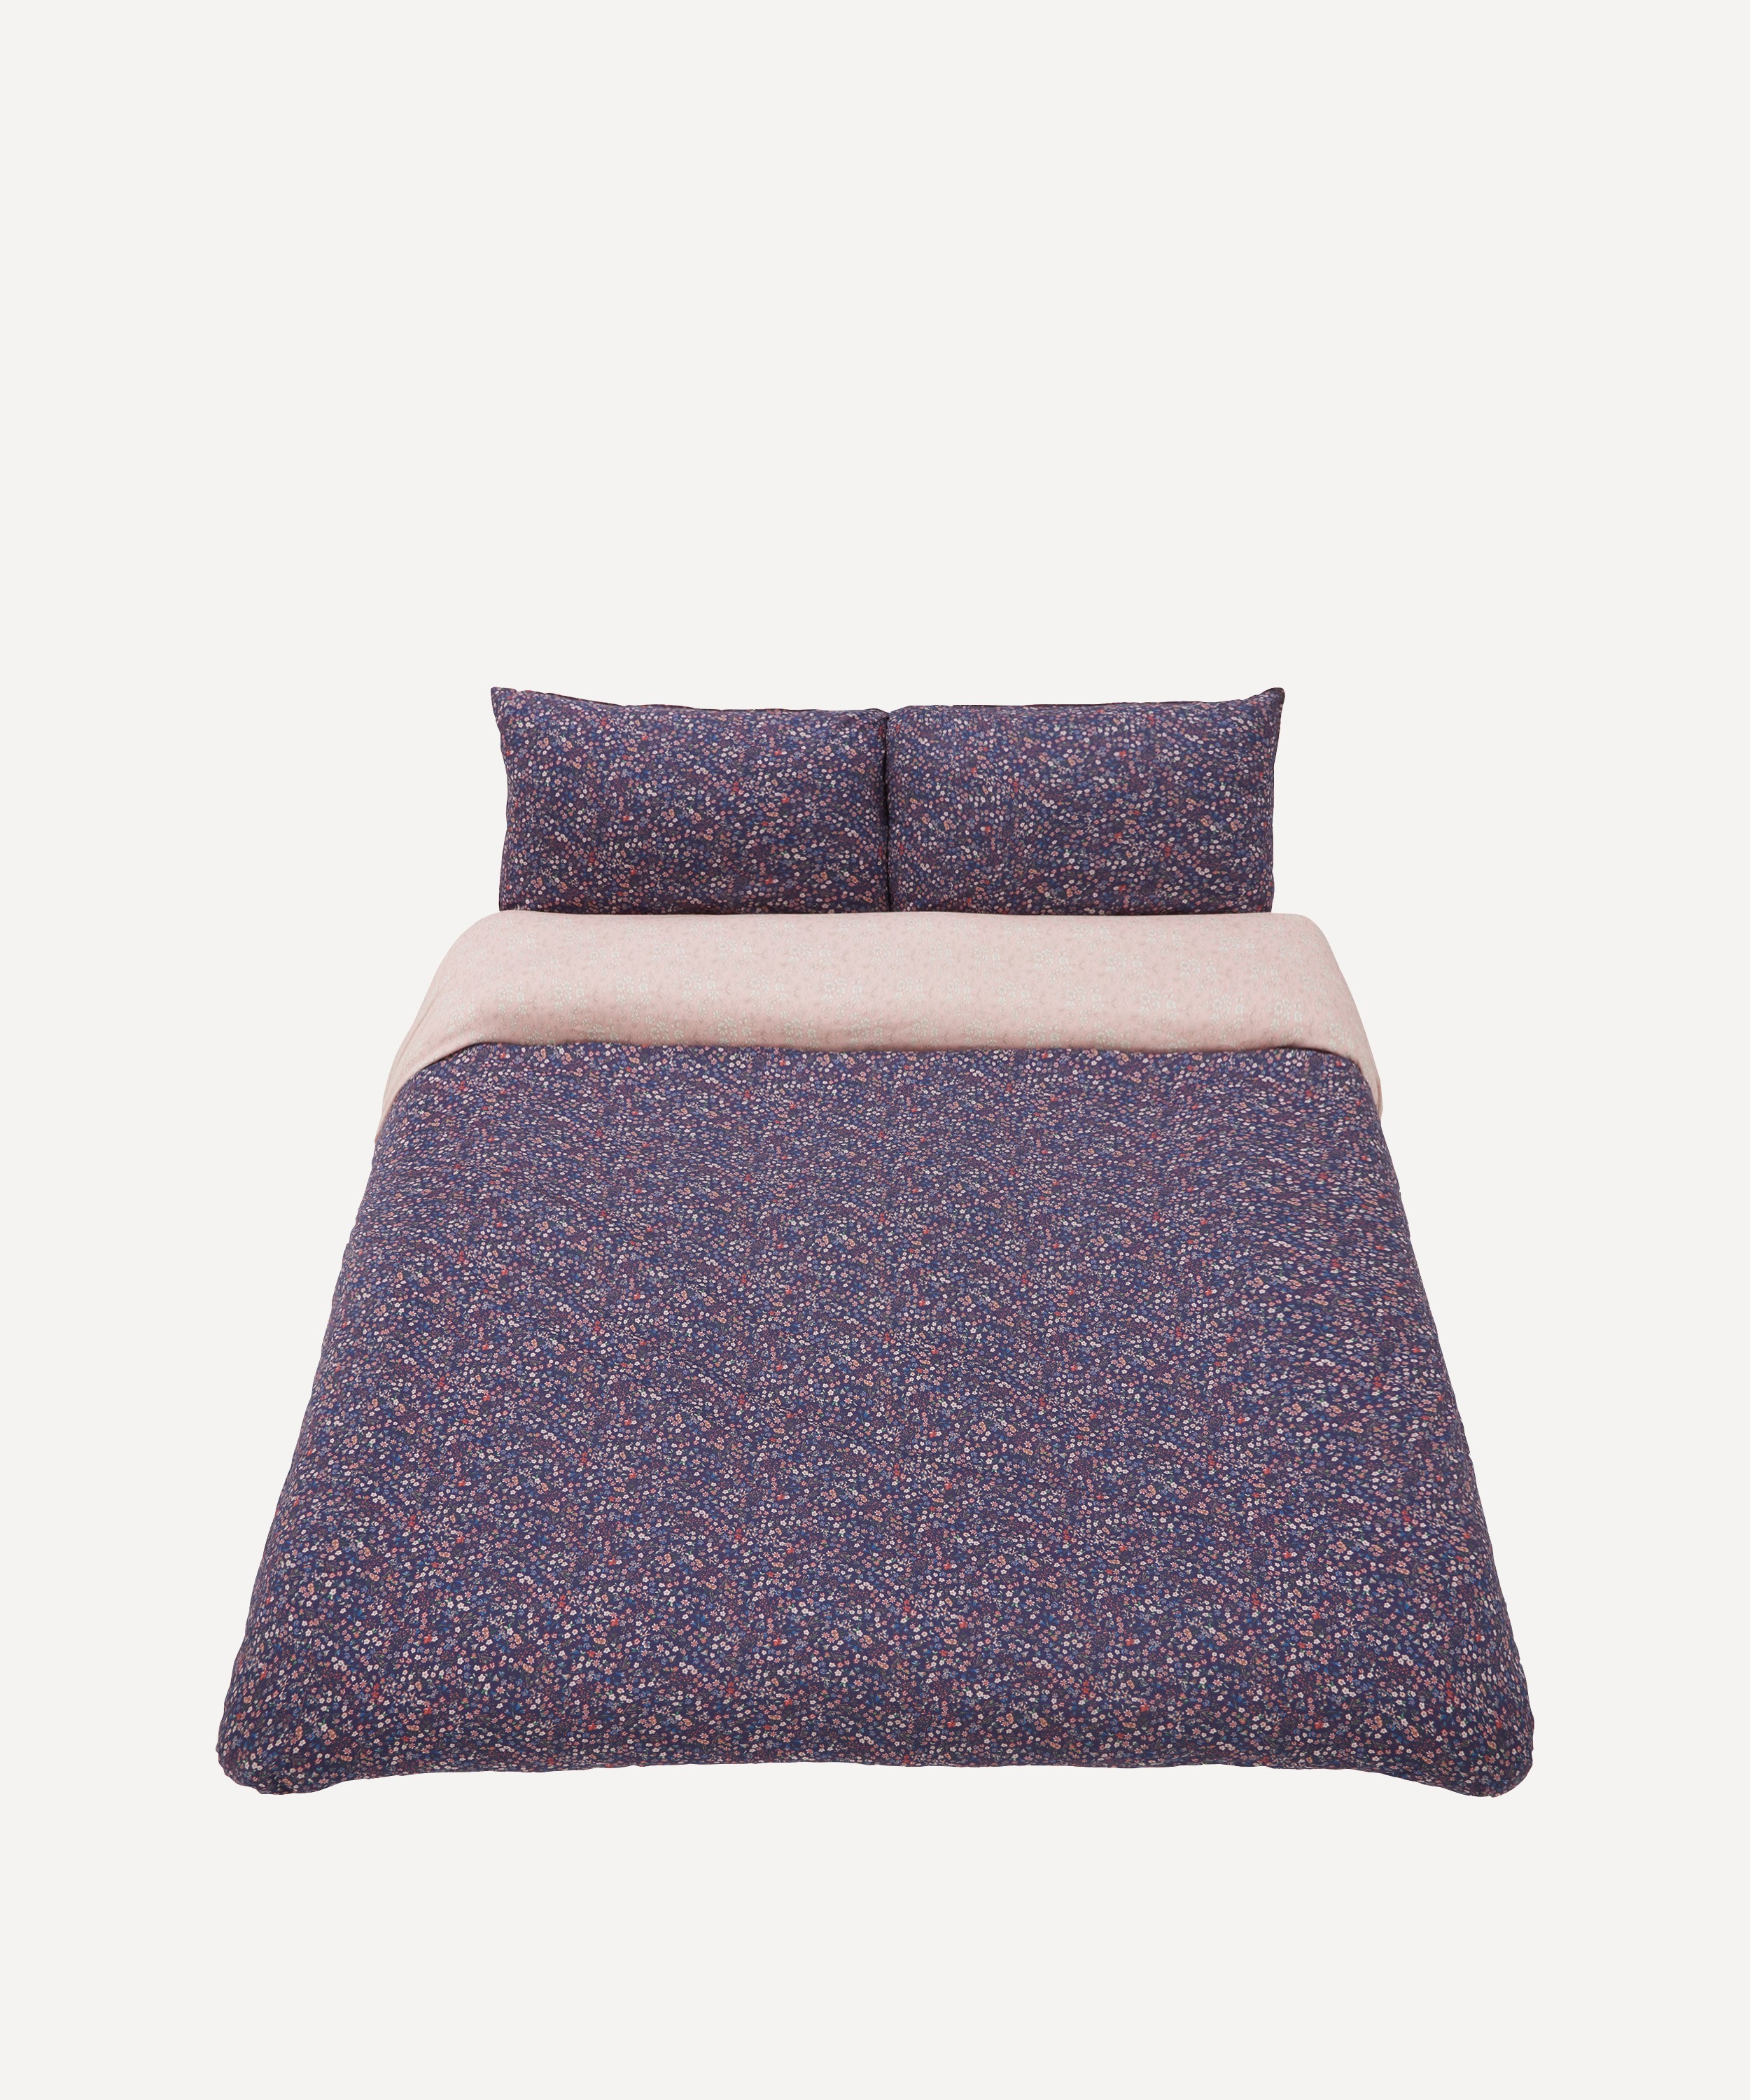 Coco & Wolf - Donna Leigh and Capel King Duvet Cover Set image number 0